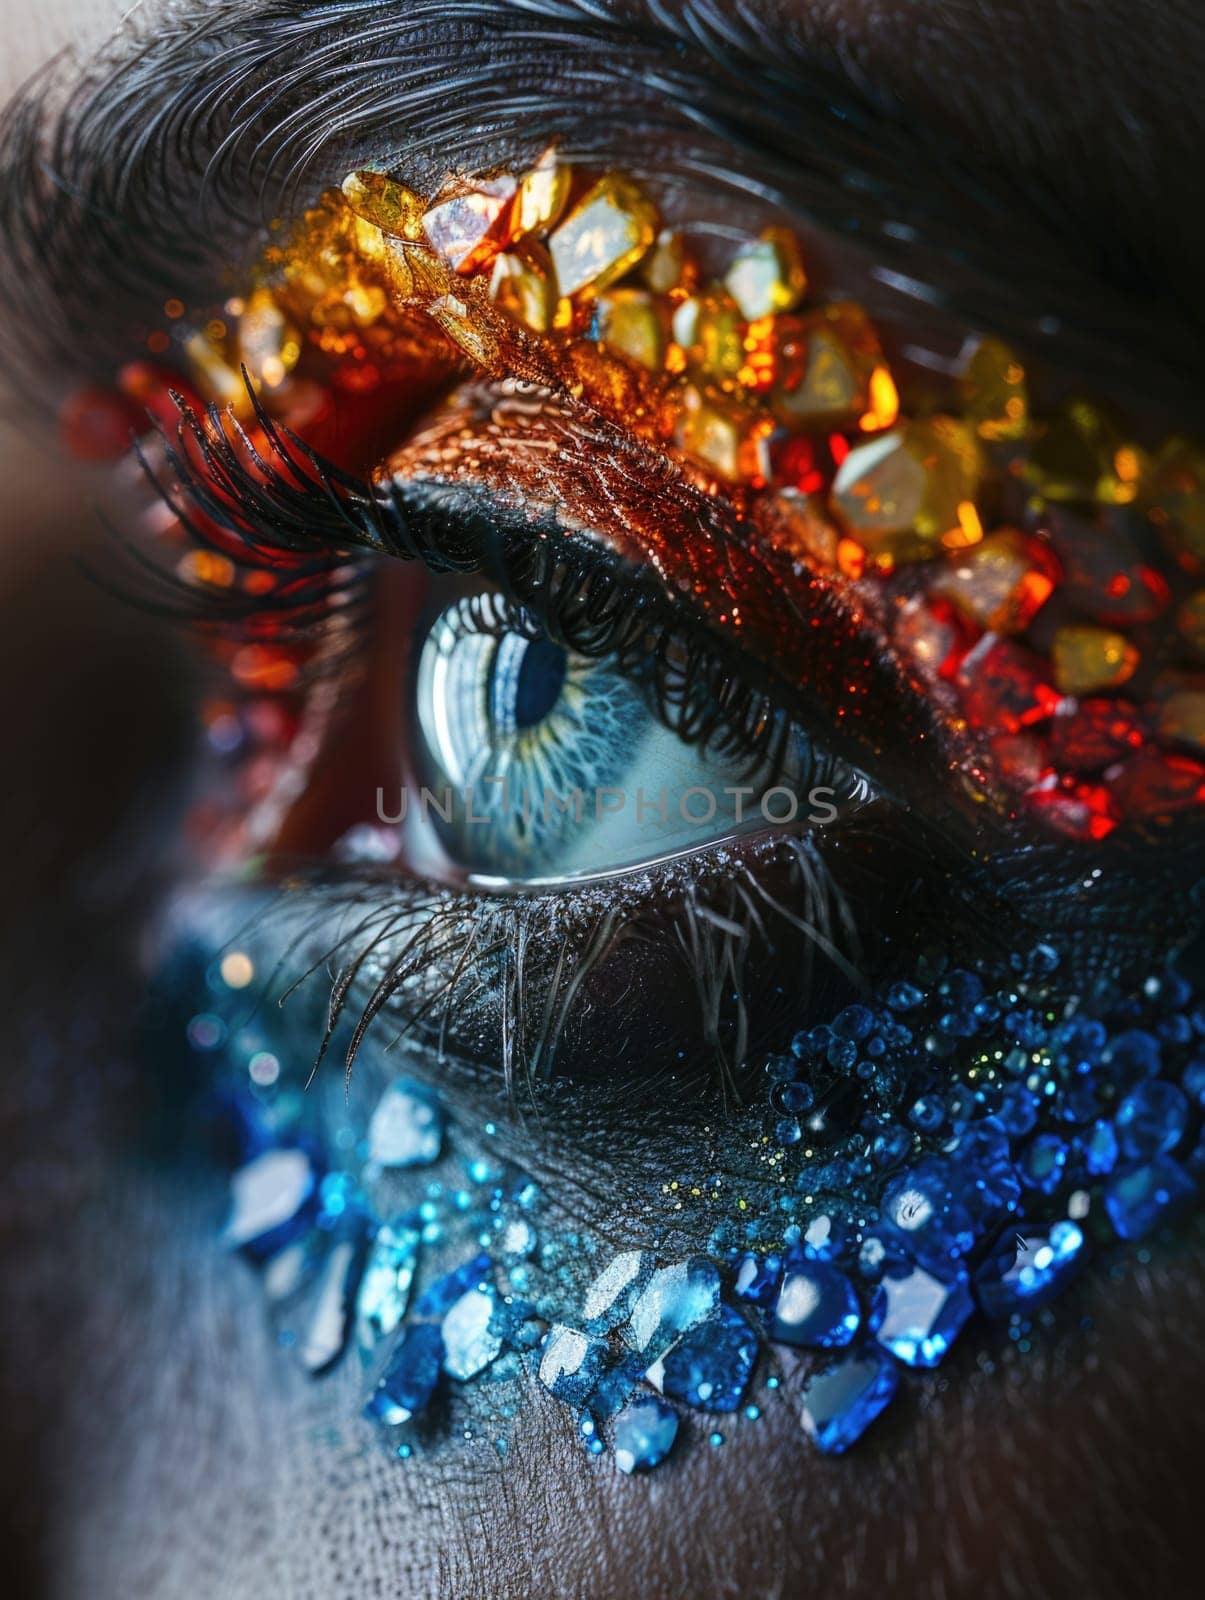 A close-up portrait showcasing a persons eye adorned with vibrant and colorful makeup, highlighting intricate details and artistic creativity.